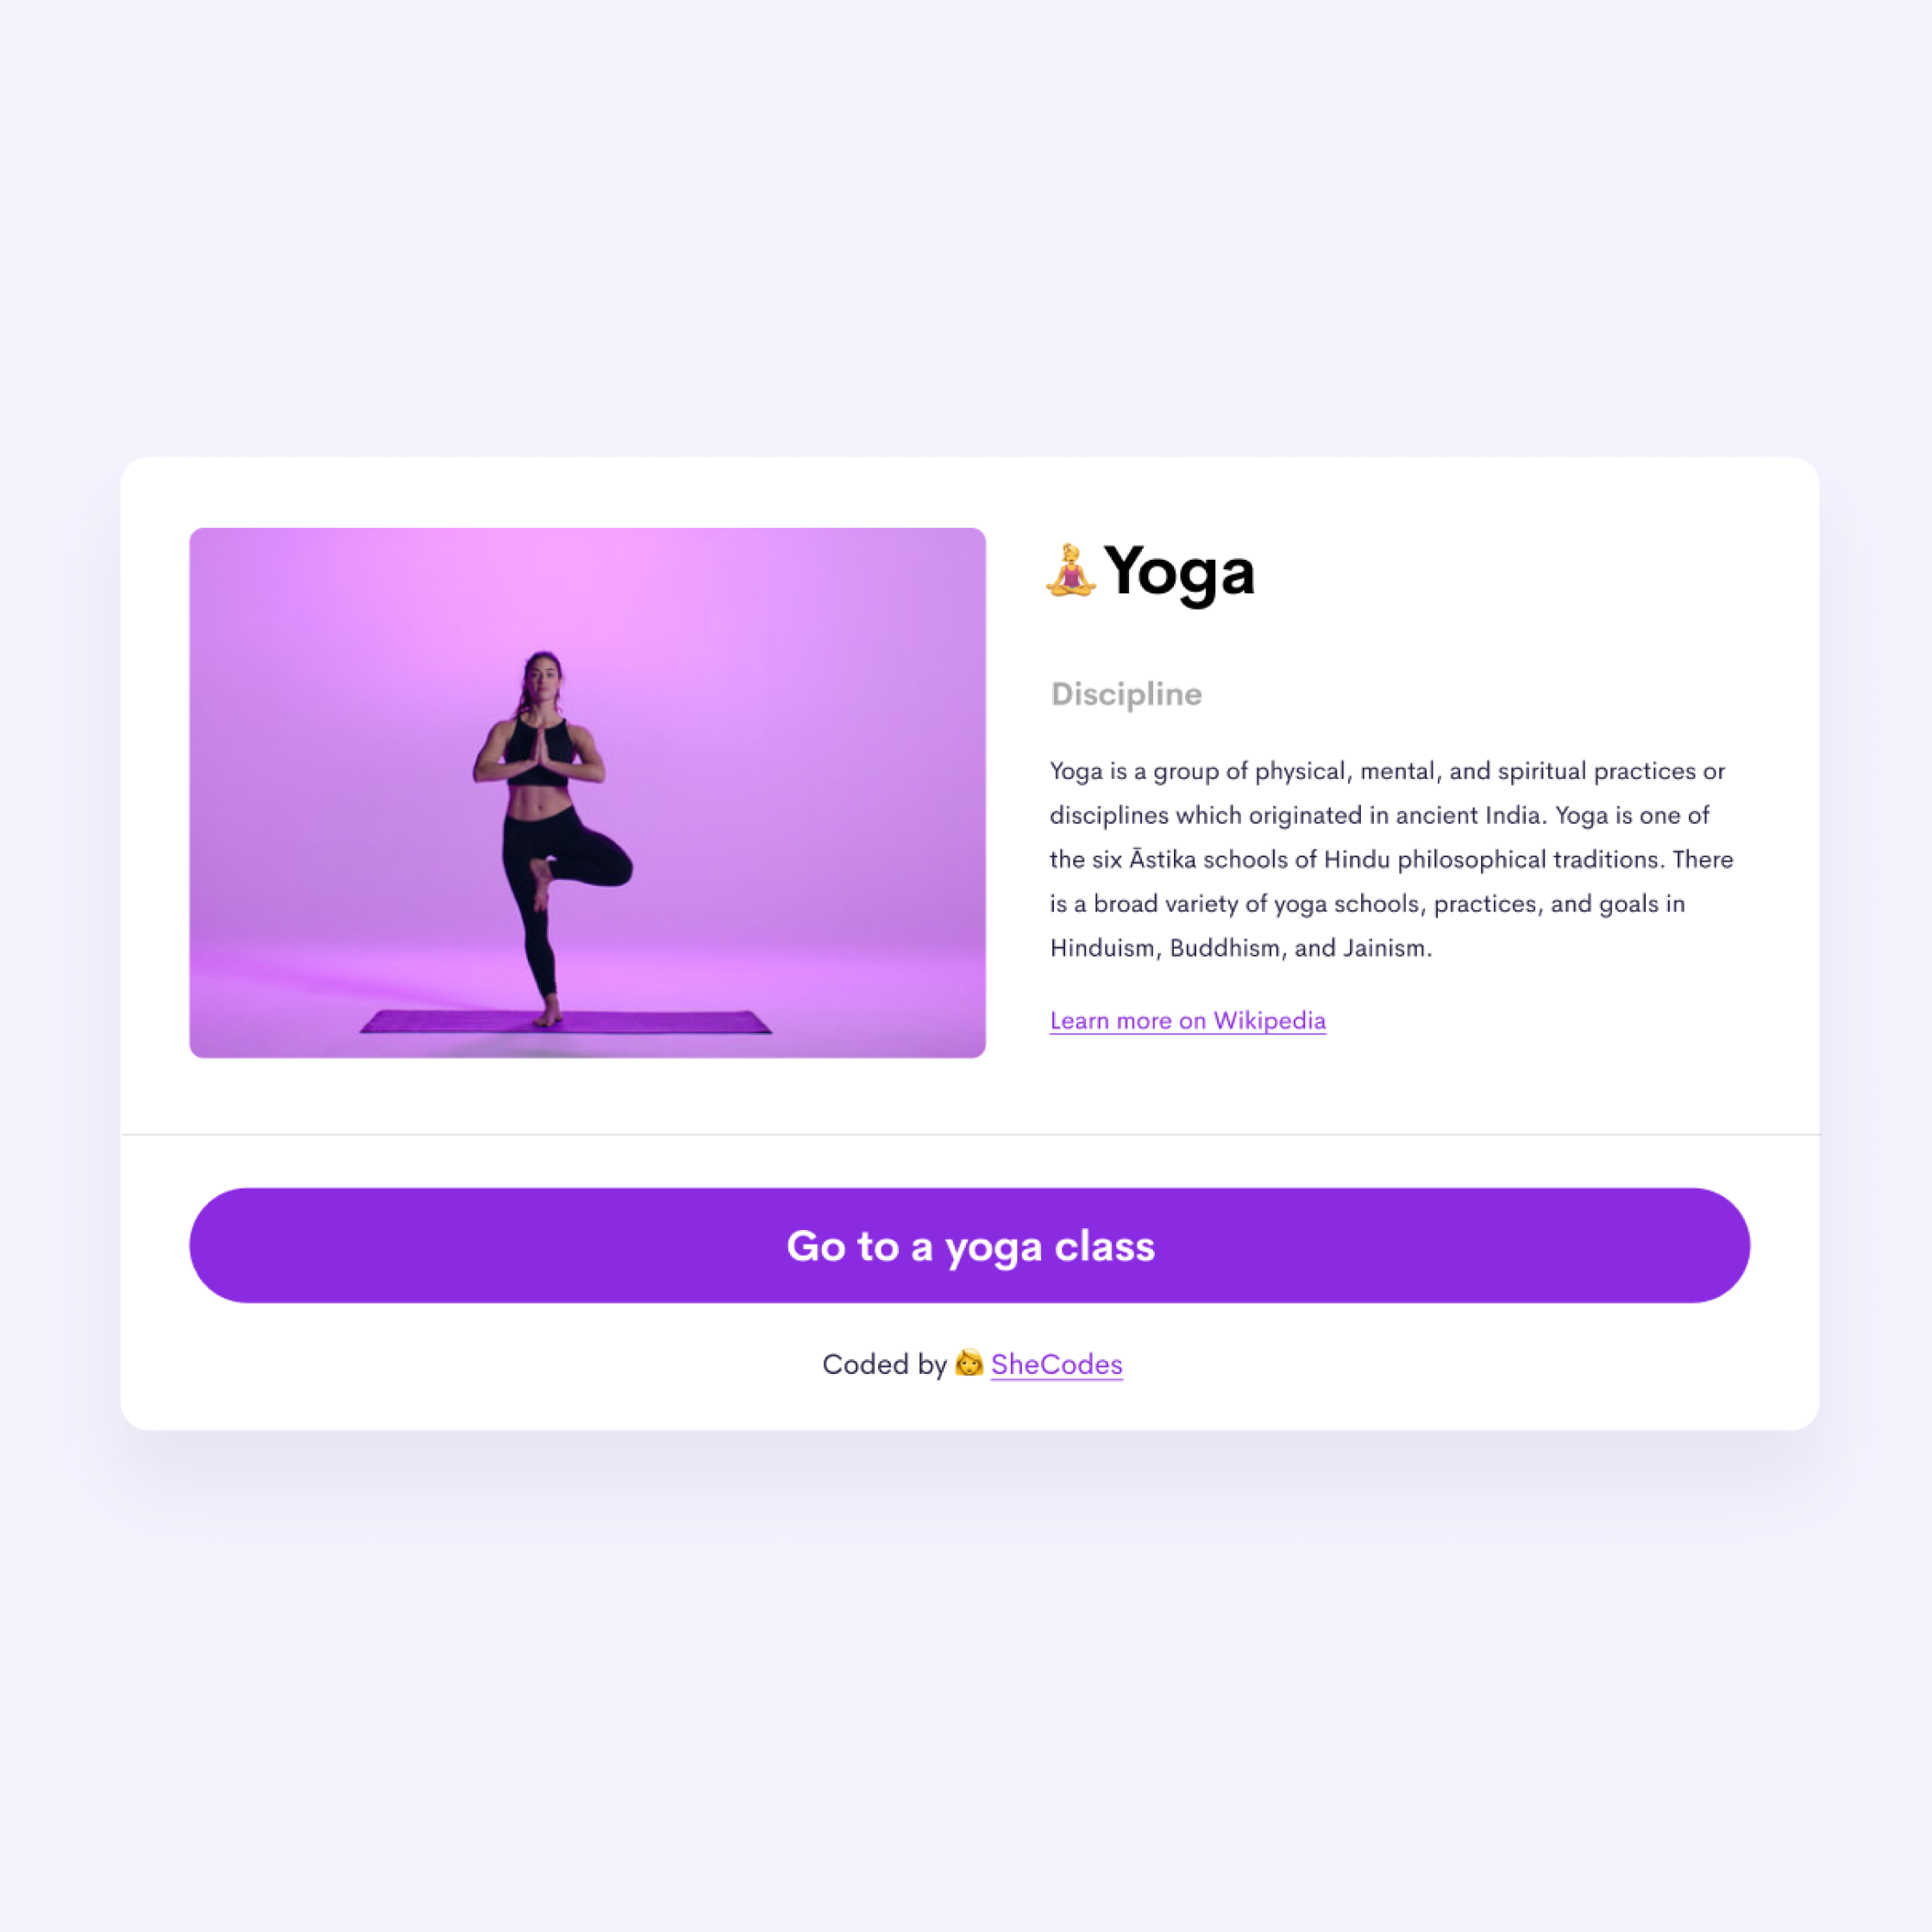 Picture of the referred yoga app